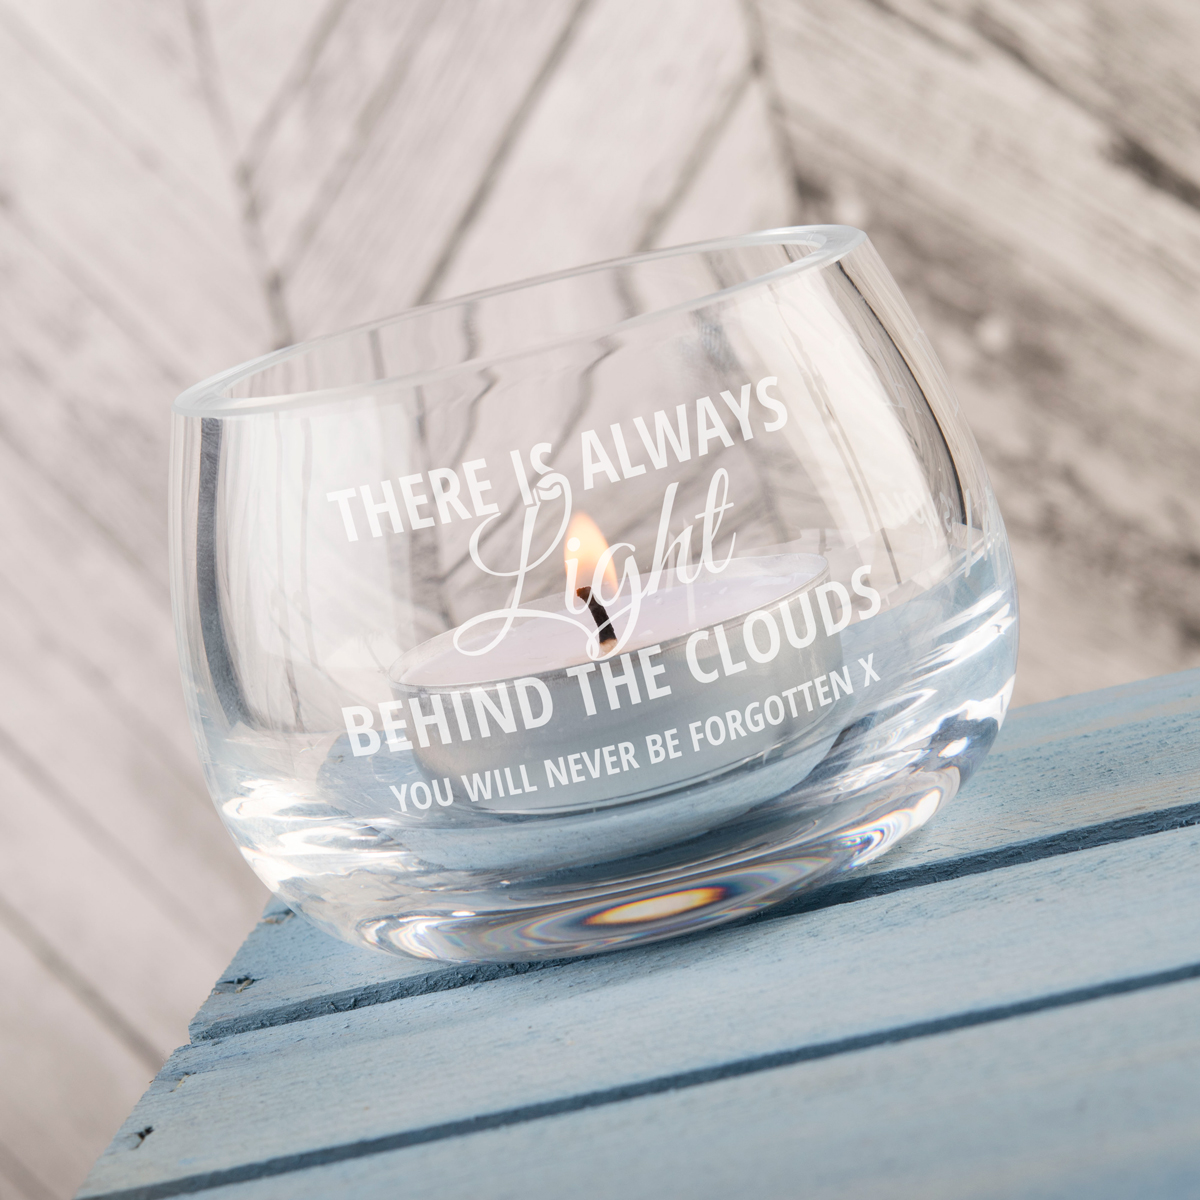 Personalised Glass Candle Holder - There Is Always Light